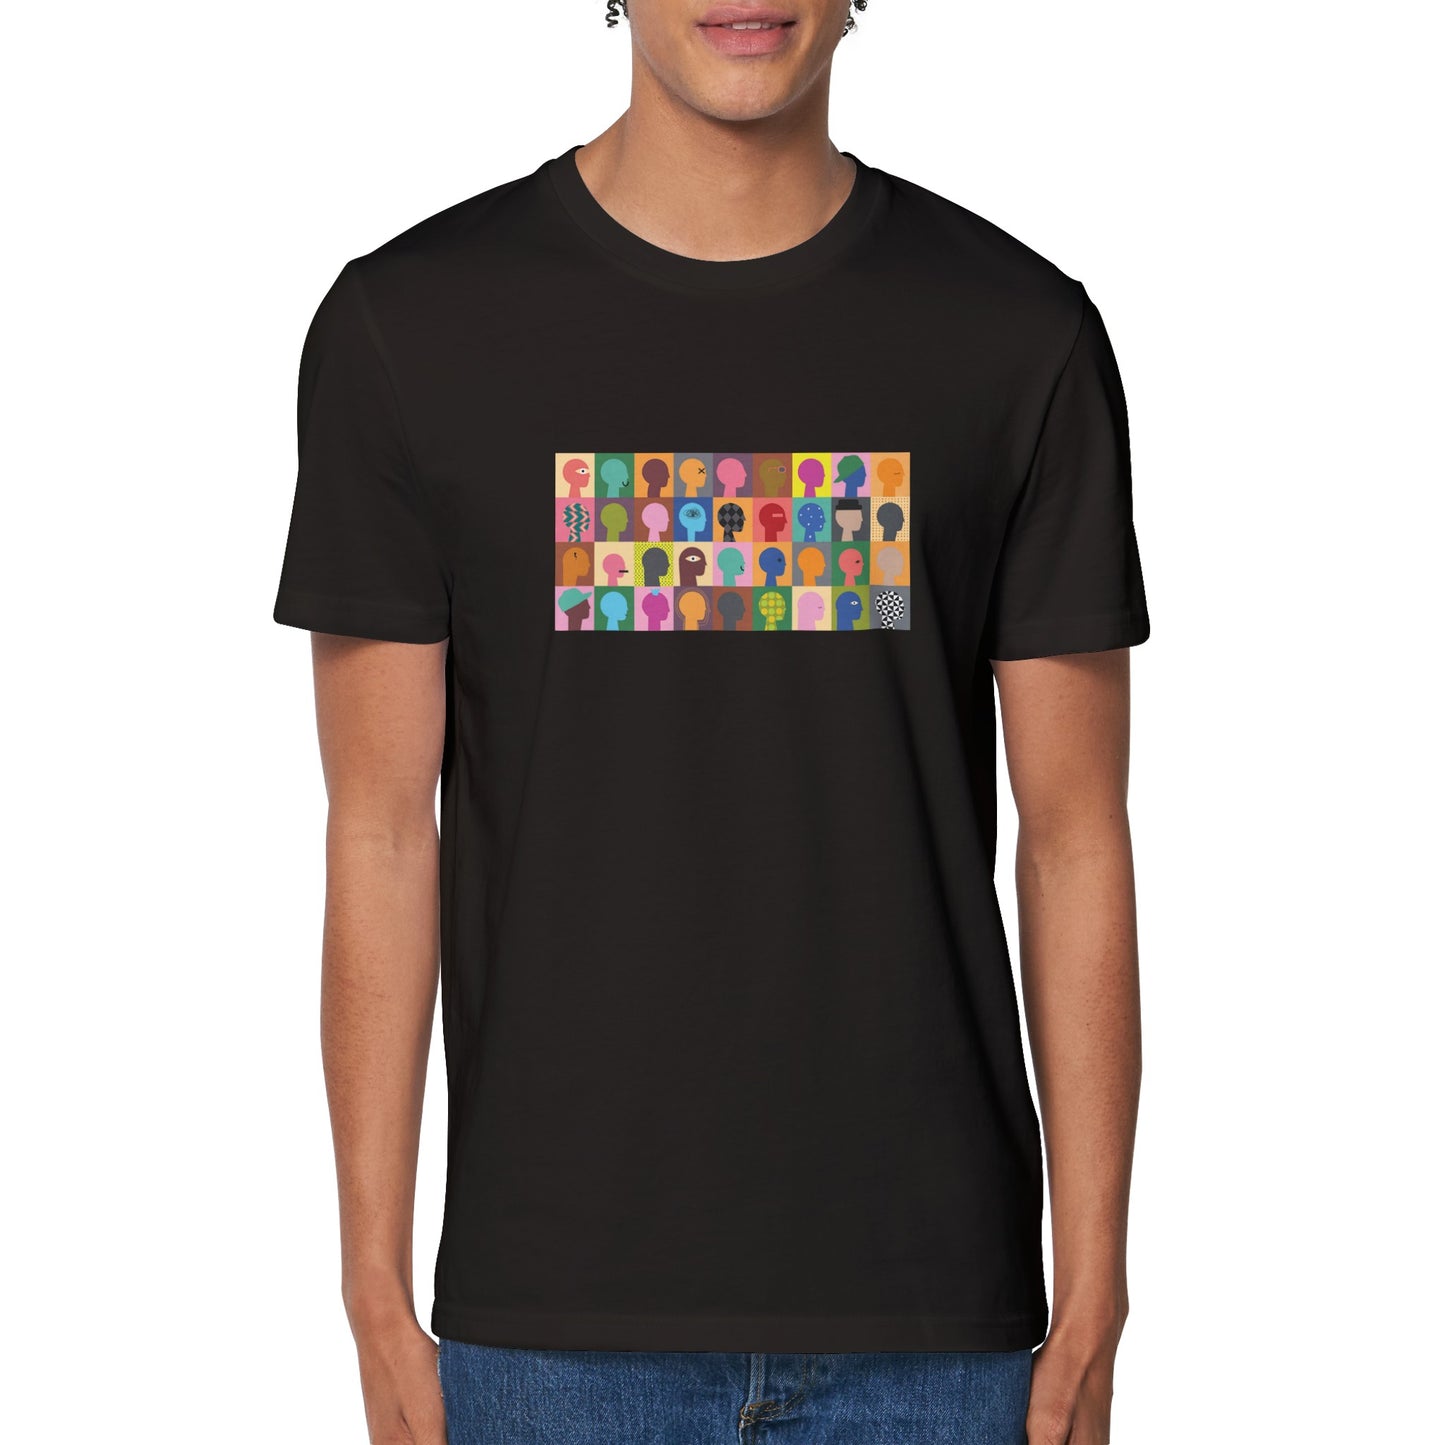 100% Organic Unisex T-shirt/Abstract-People